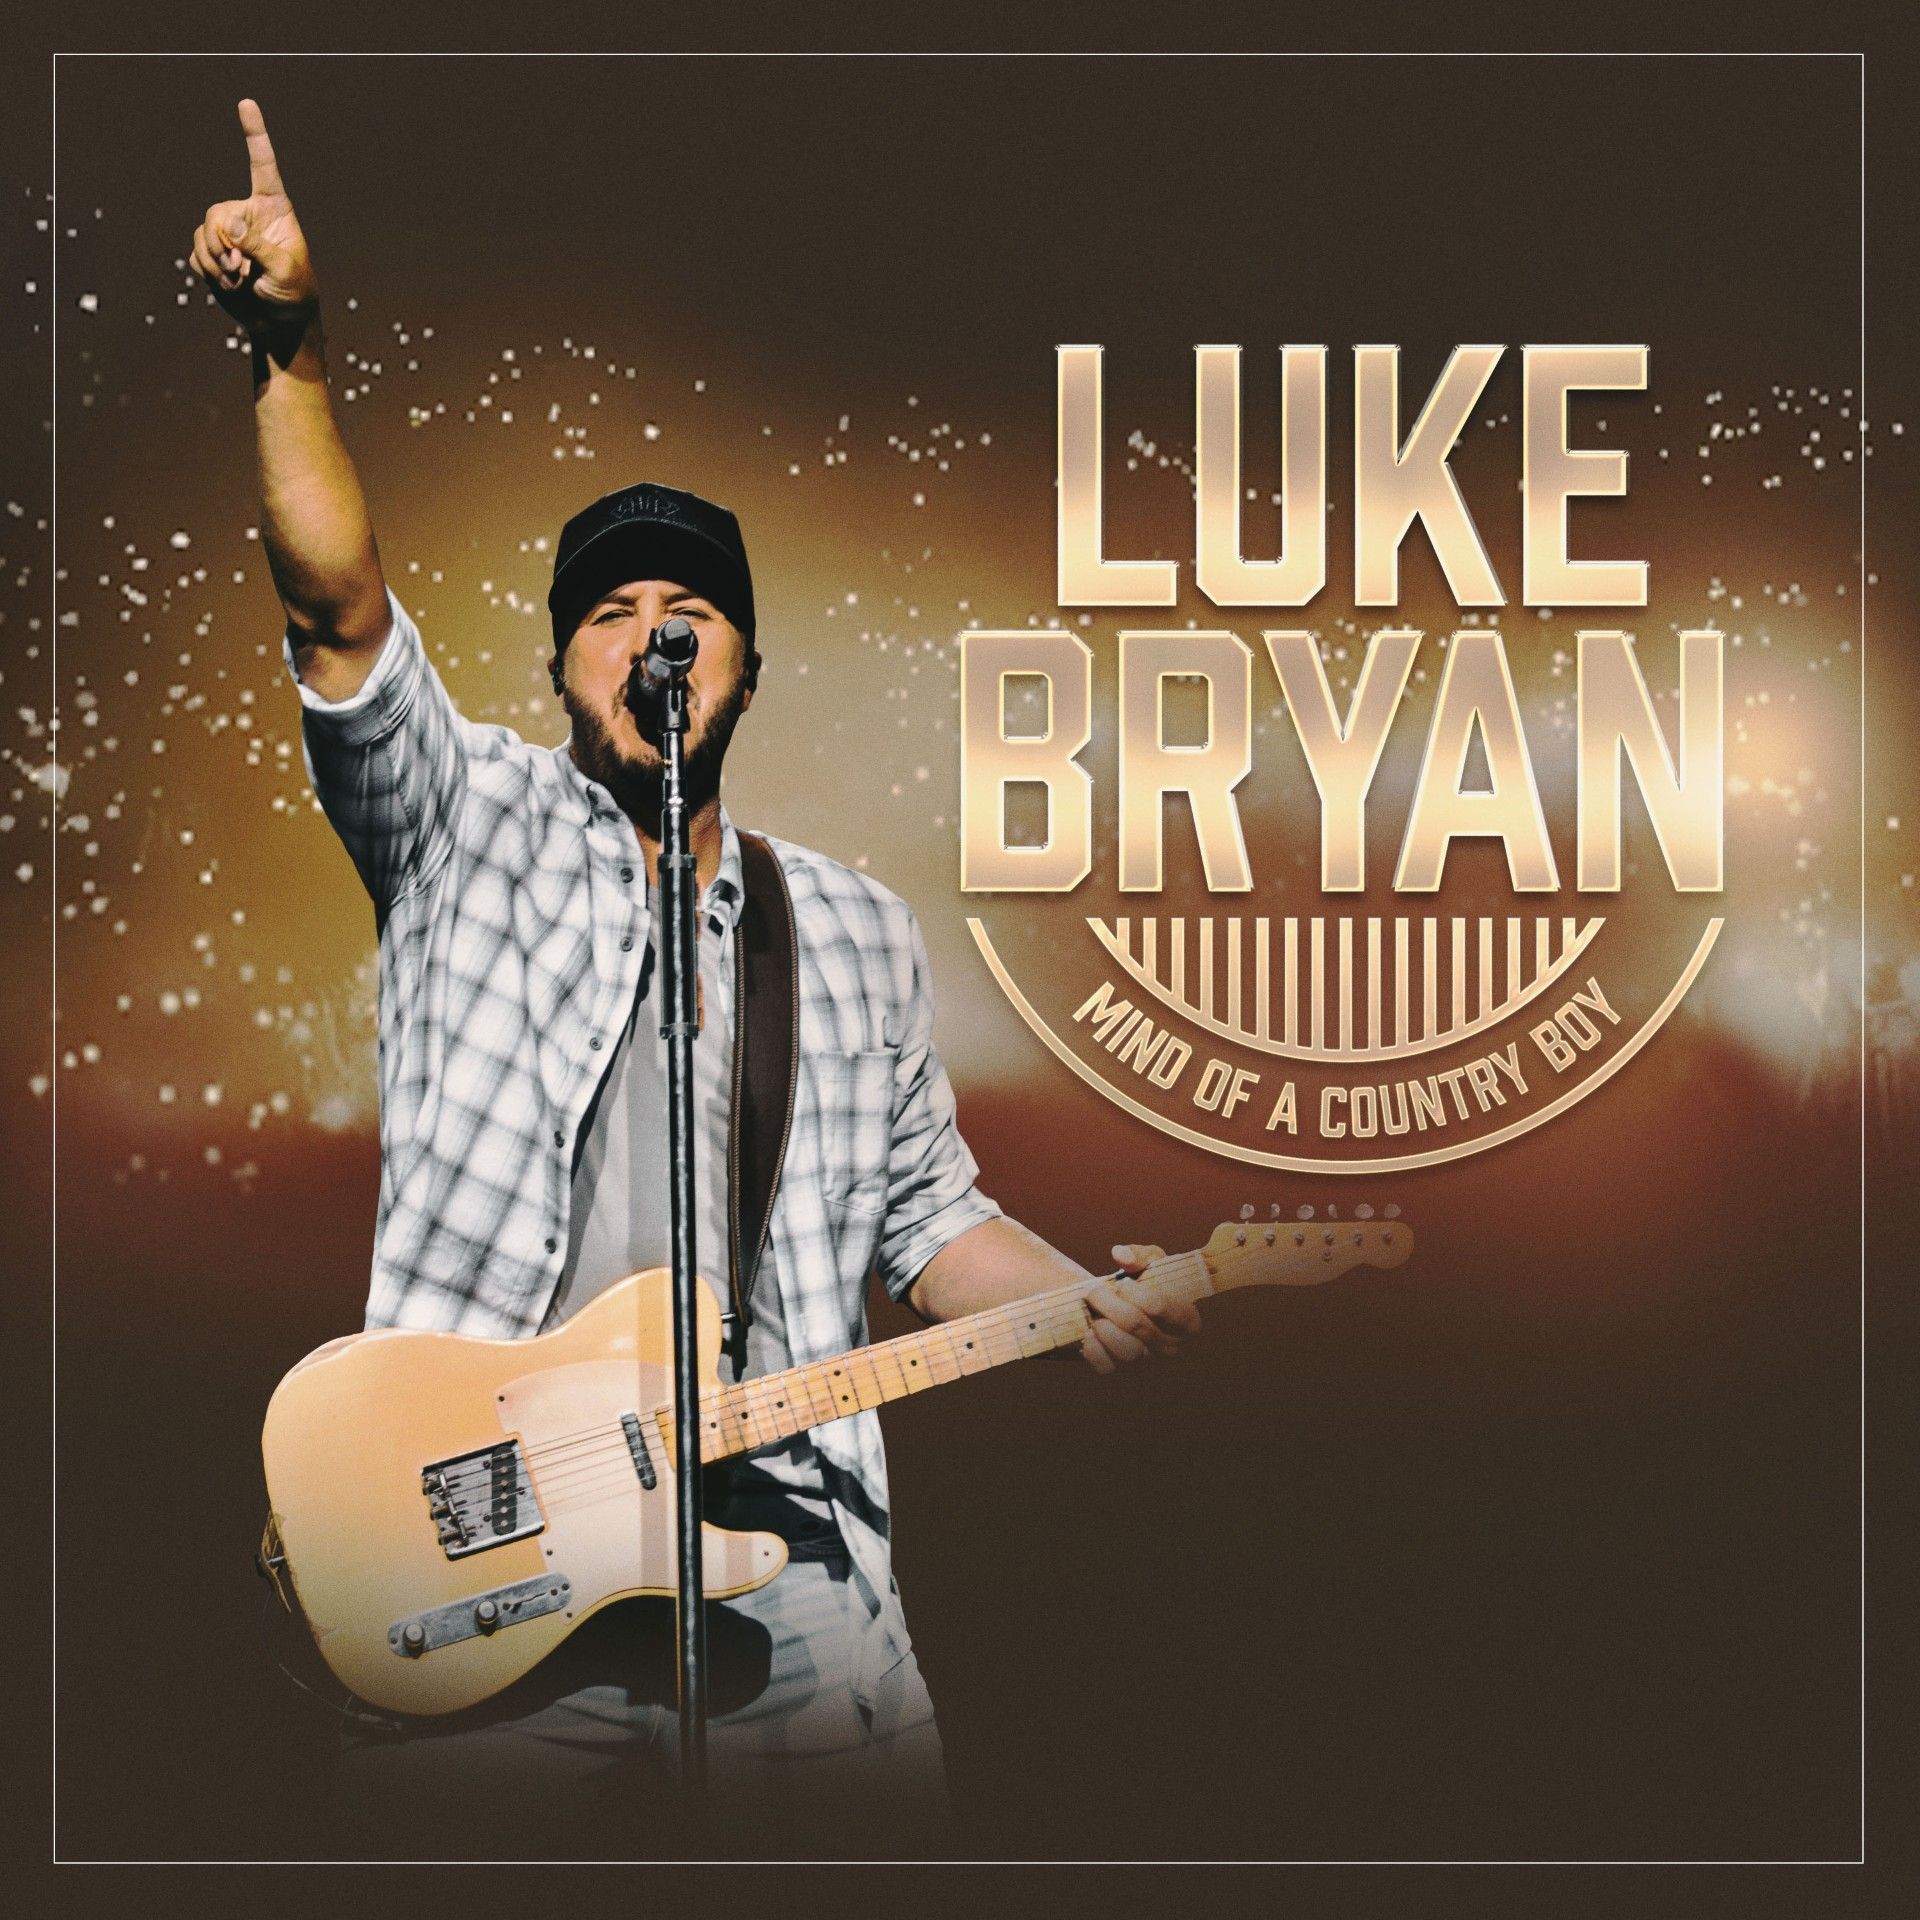 Luke Bryan Releases “Mind Of A Country Boy” Across All Digital Platforms Today